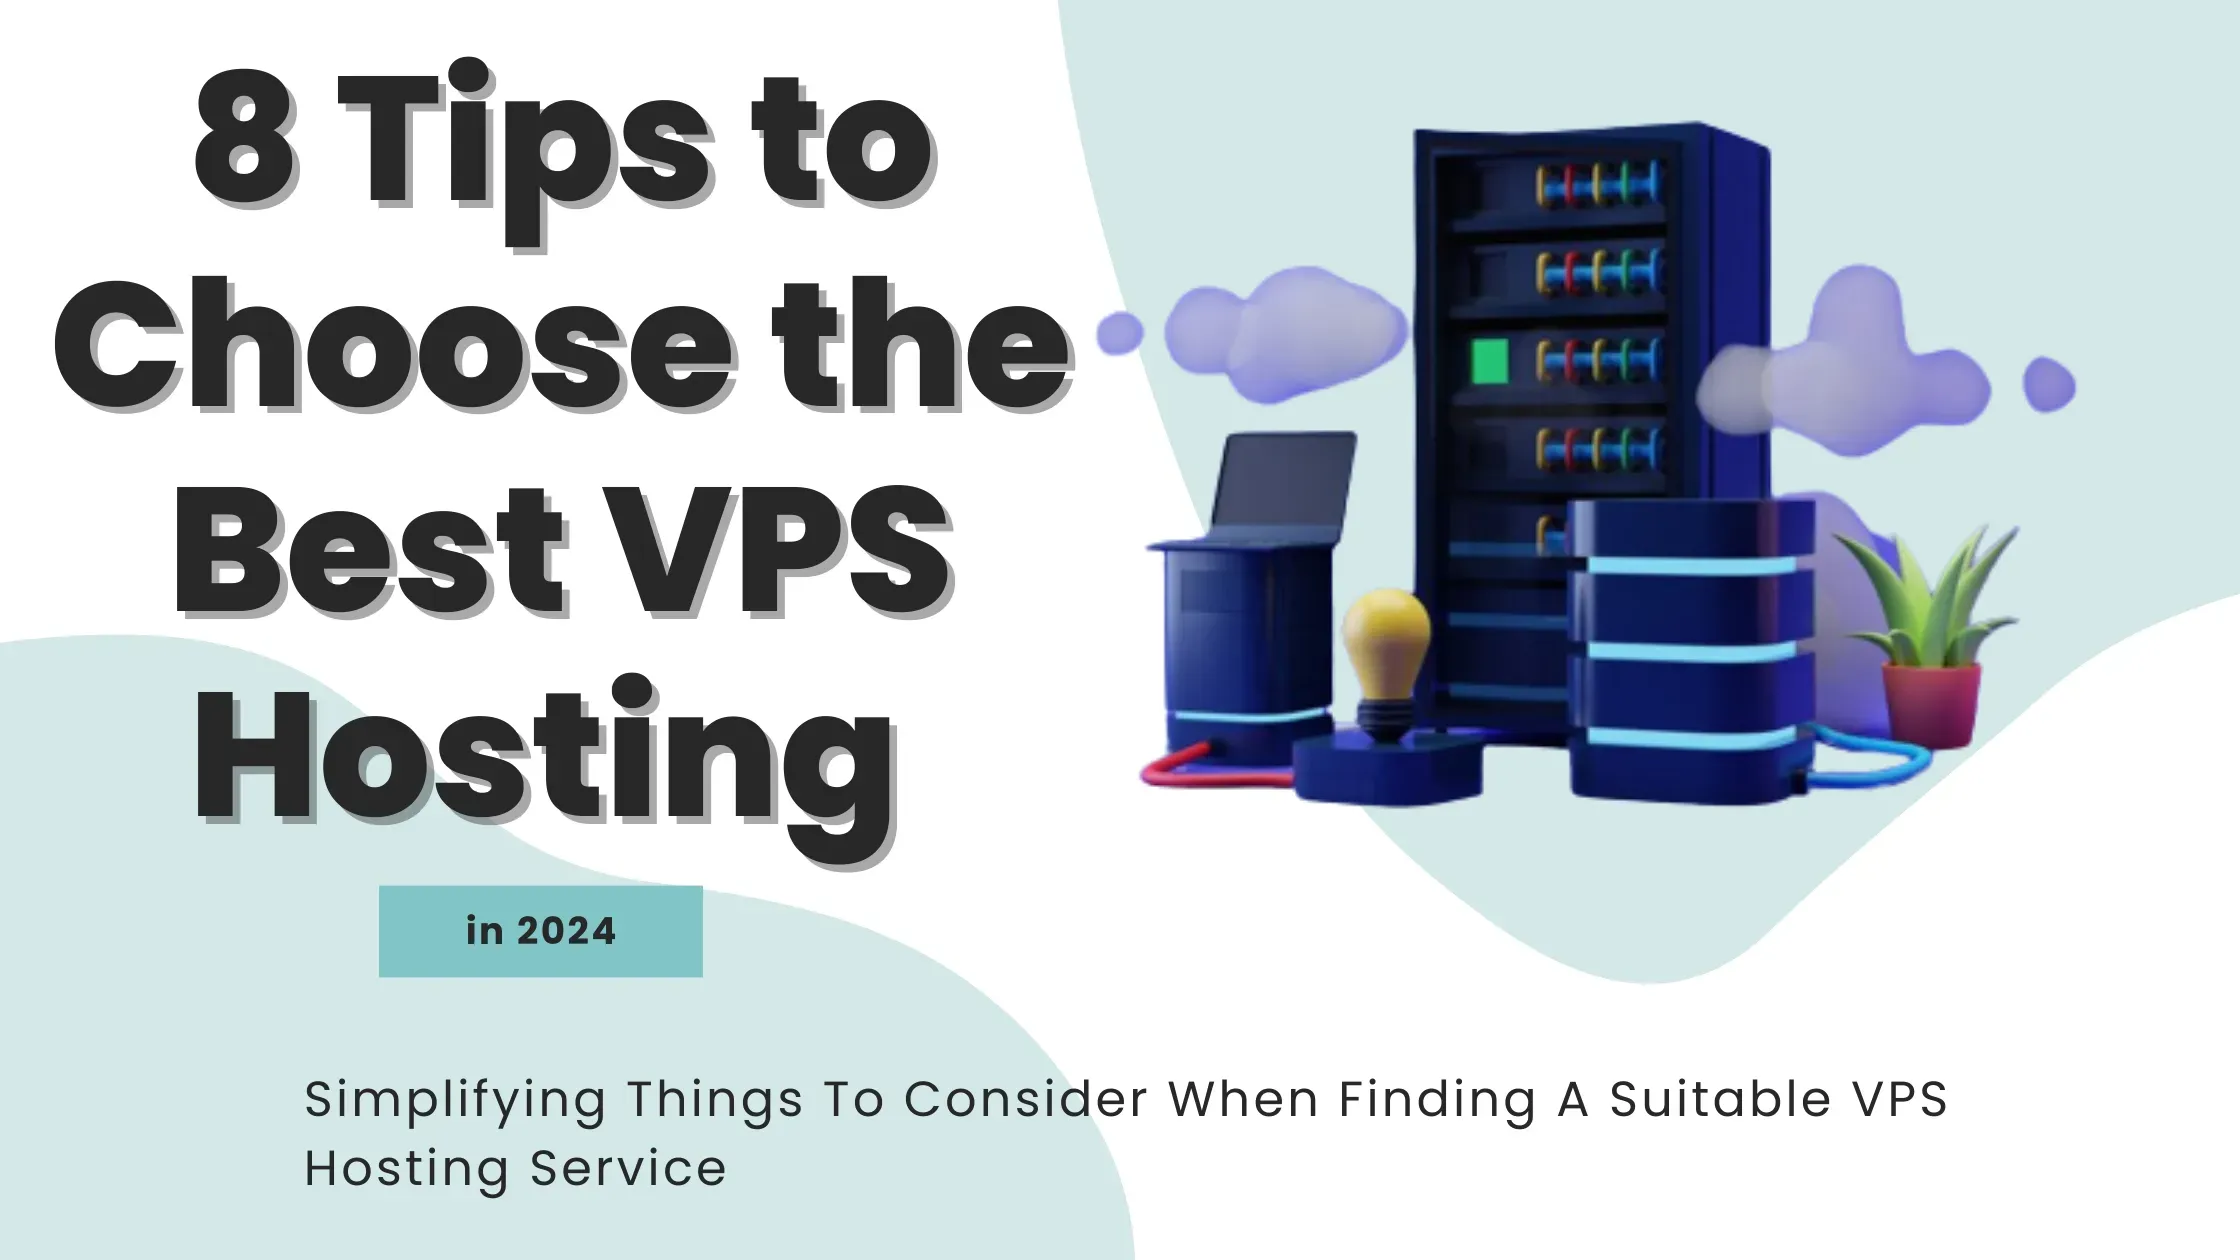 Tips for Finding A Suitable VPS Hosting Service